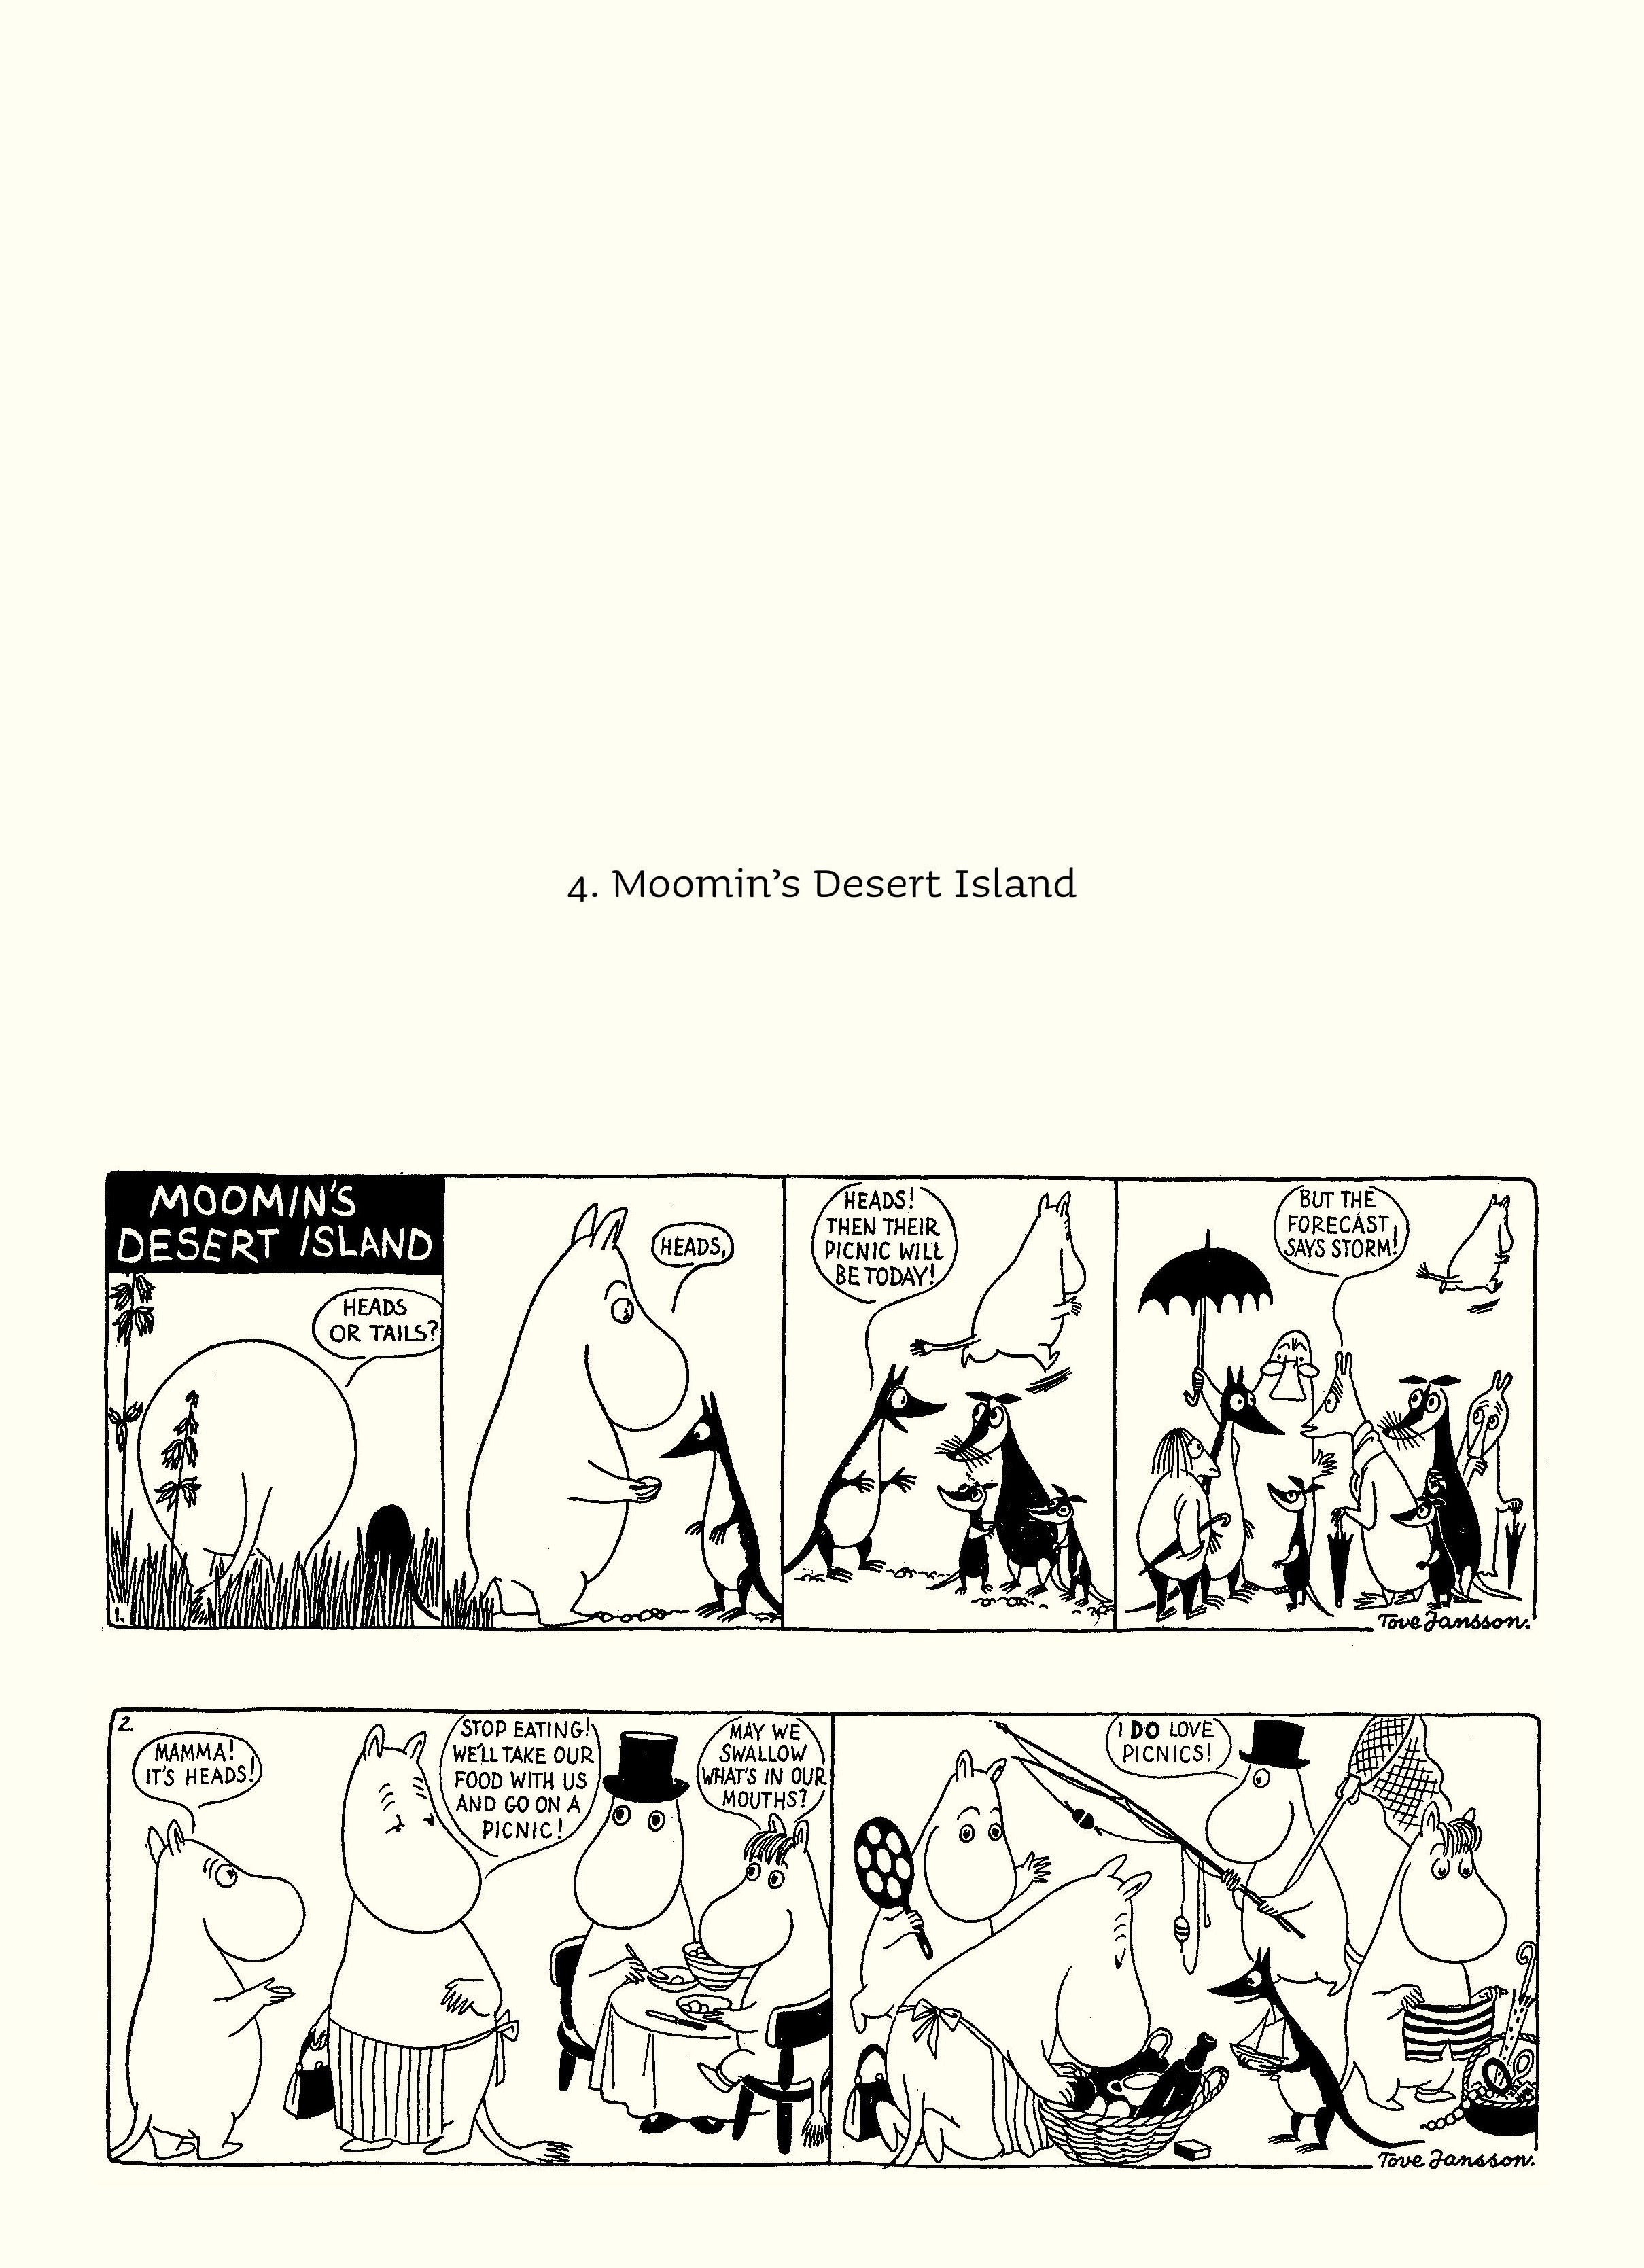 Read online Moomin: The Complete Tove Jansson Comic Strip comic -  Issue # TPB 1 - 70